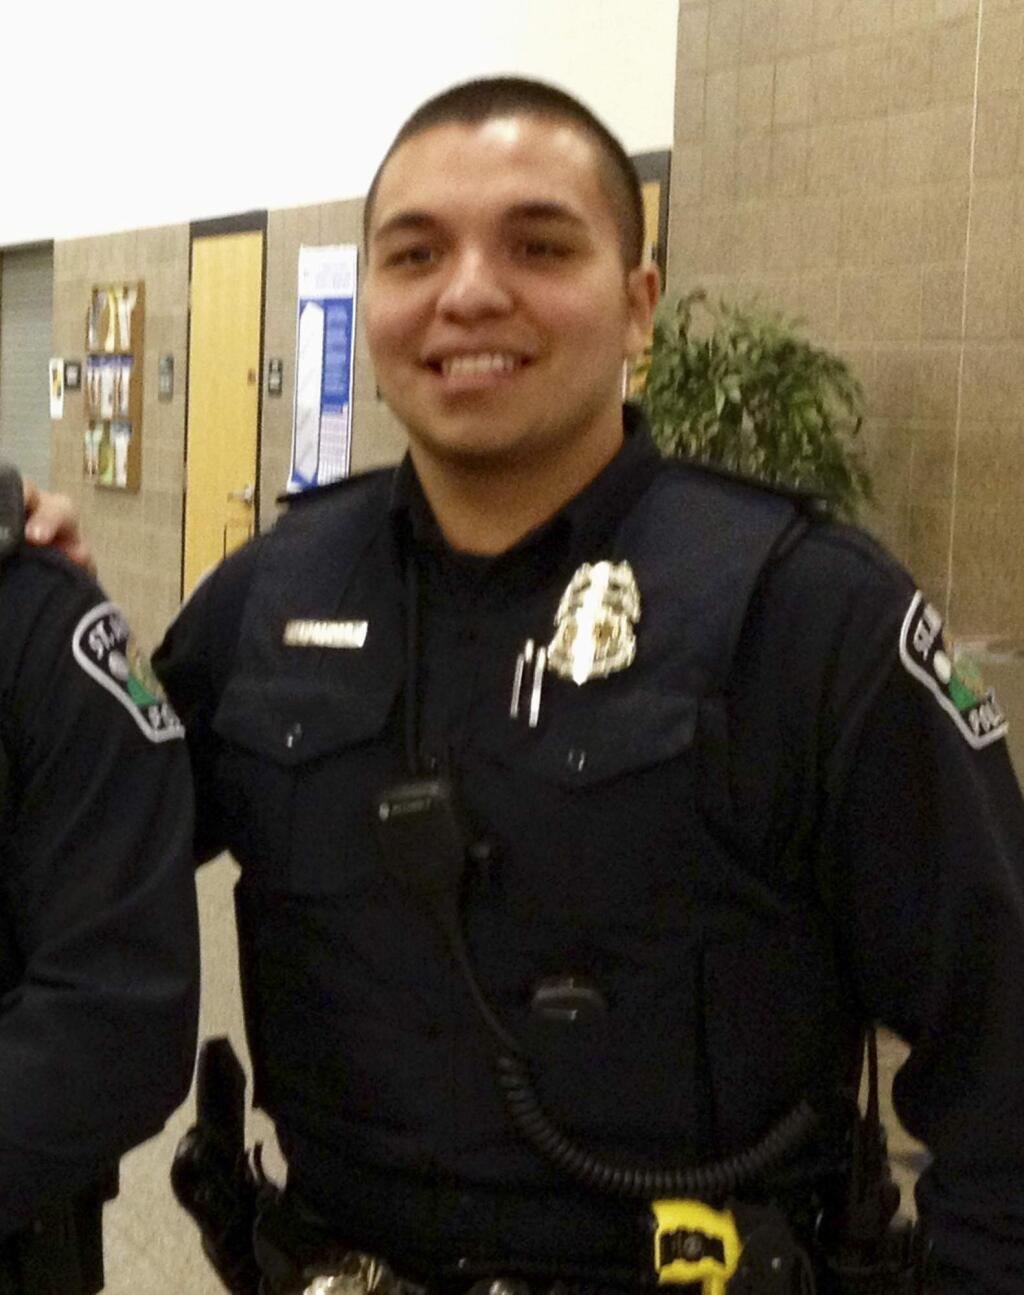 FILE - This Jan. 8, 2013, file photo provided by Christian Dobratz shows St. Anthony police officer Jeronimo Yanez outside the city council chambers in St. Anthony, Minn. Prosecutors announced Wednesday, Nov. 16, 2016, that Yanez, the officer who fatally shot Philando Castile during a traffic stop on July 6, 2016, in Falcon Heights, Minn., has been charged with second-degree manslaughter in the killing. (Christian Dobratz via AP, File)